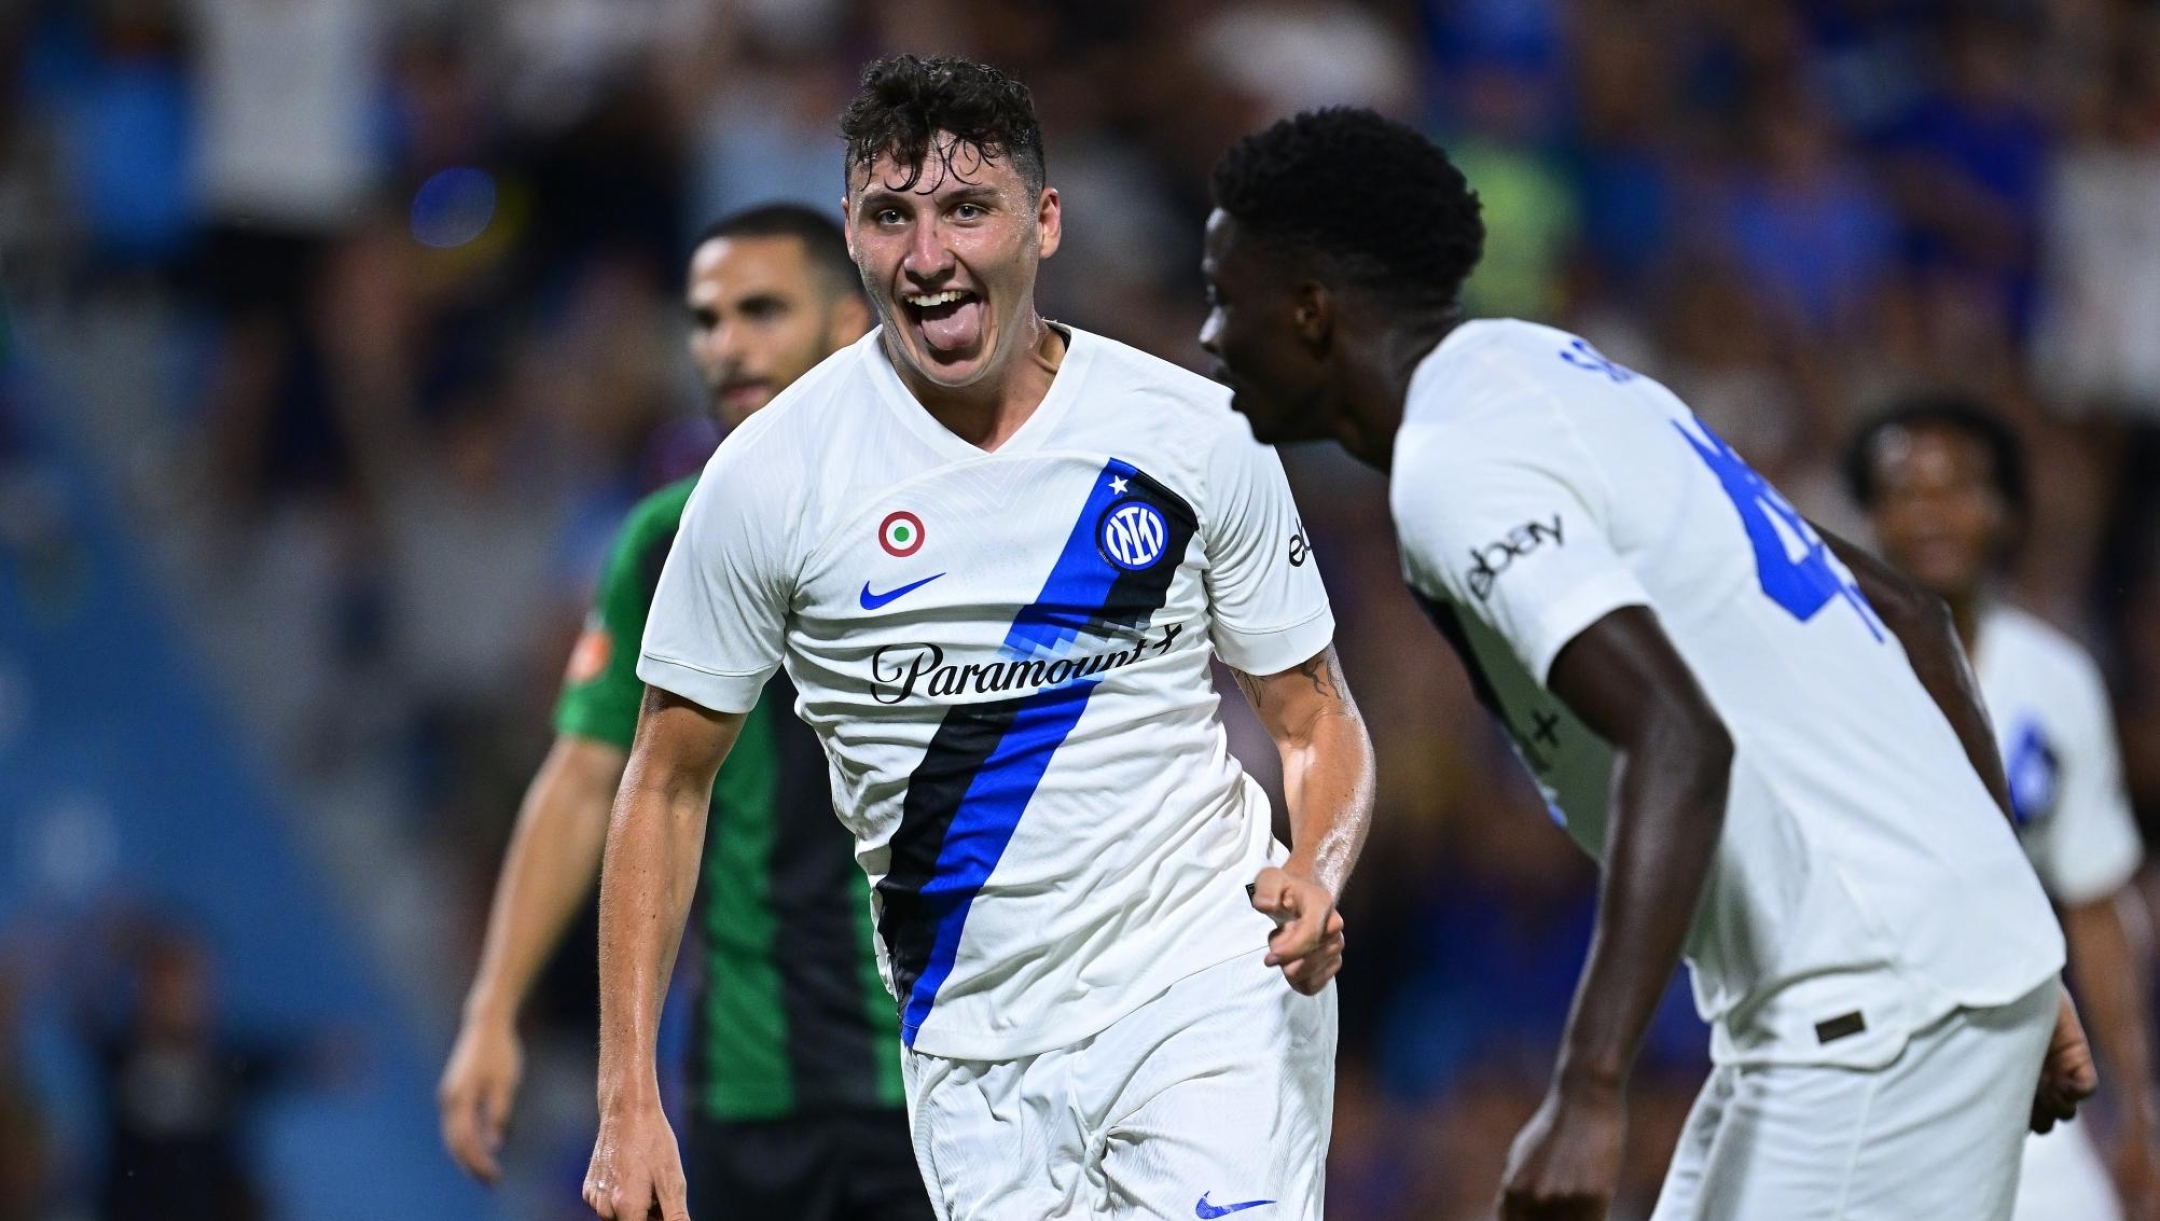 FERRARA, ITALY - AUGUST 13:  Giacomo Stabile of FC Internazionale celebrates after scoring the goal during the Pre- Season Friendly match between FC Internazionale and KF Egnatia at Stadio Paolo Mazza on August 13, 2023 in Ferrara, Italy. (Photo by Mattia Ozbot - Inter/Inter via Getty Images)